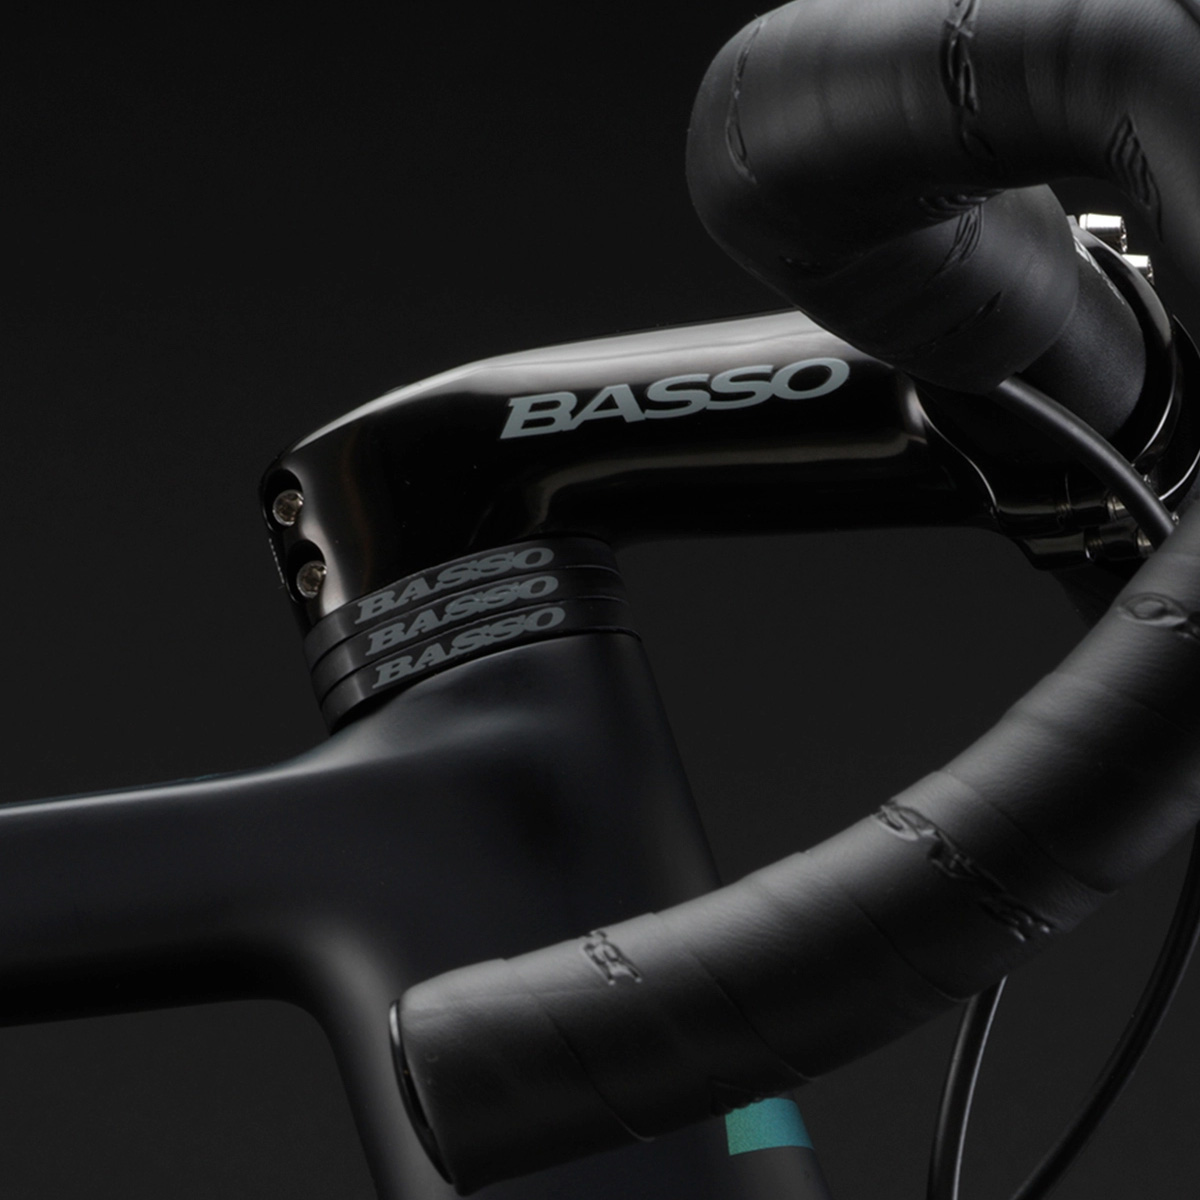 Basso Astra stem and bars